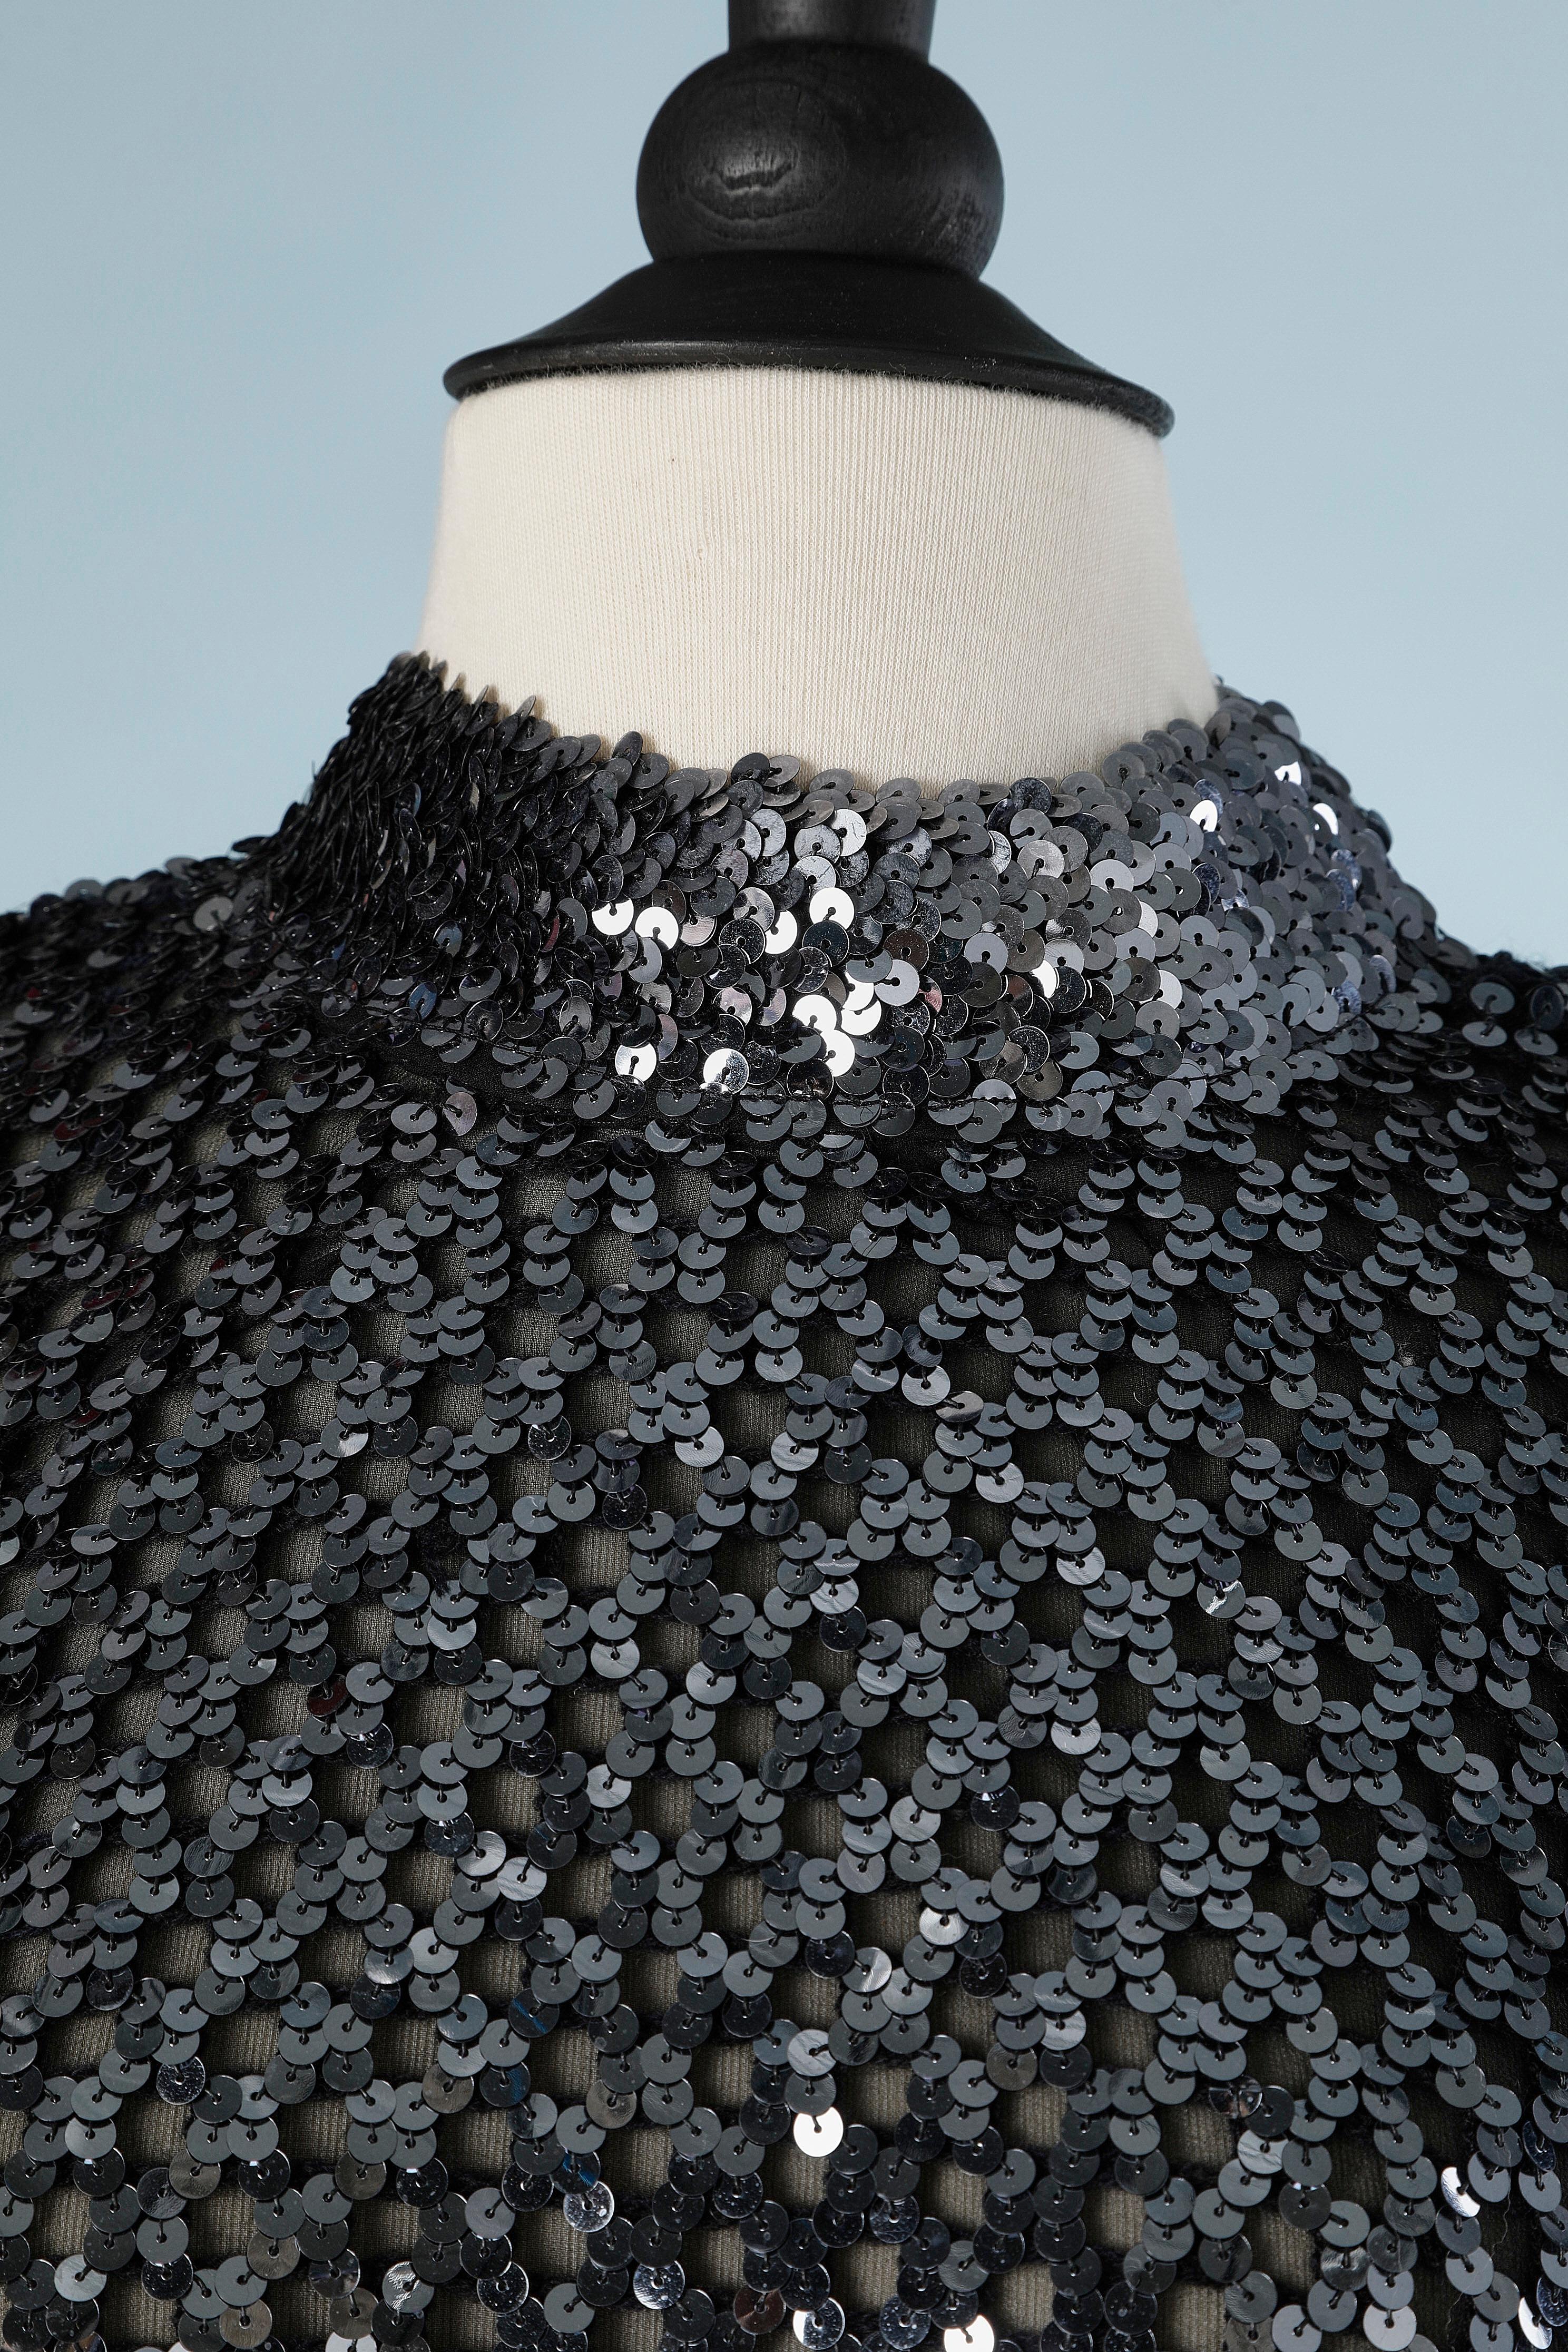 Silver sequin sweater on knit base and black chiffon lining.
Button on the middle back. 
SIZE M